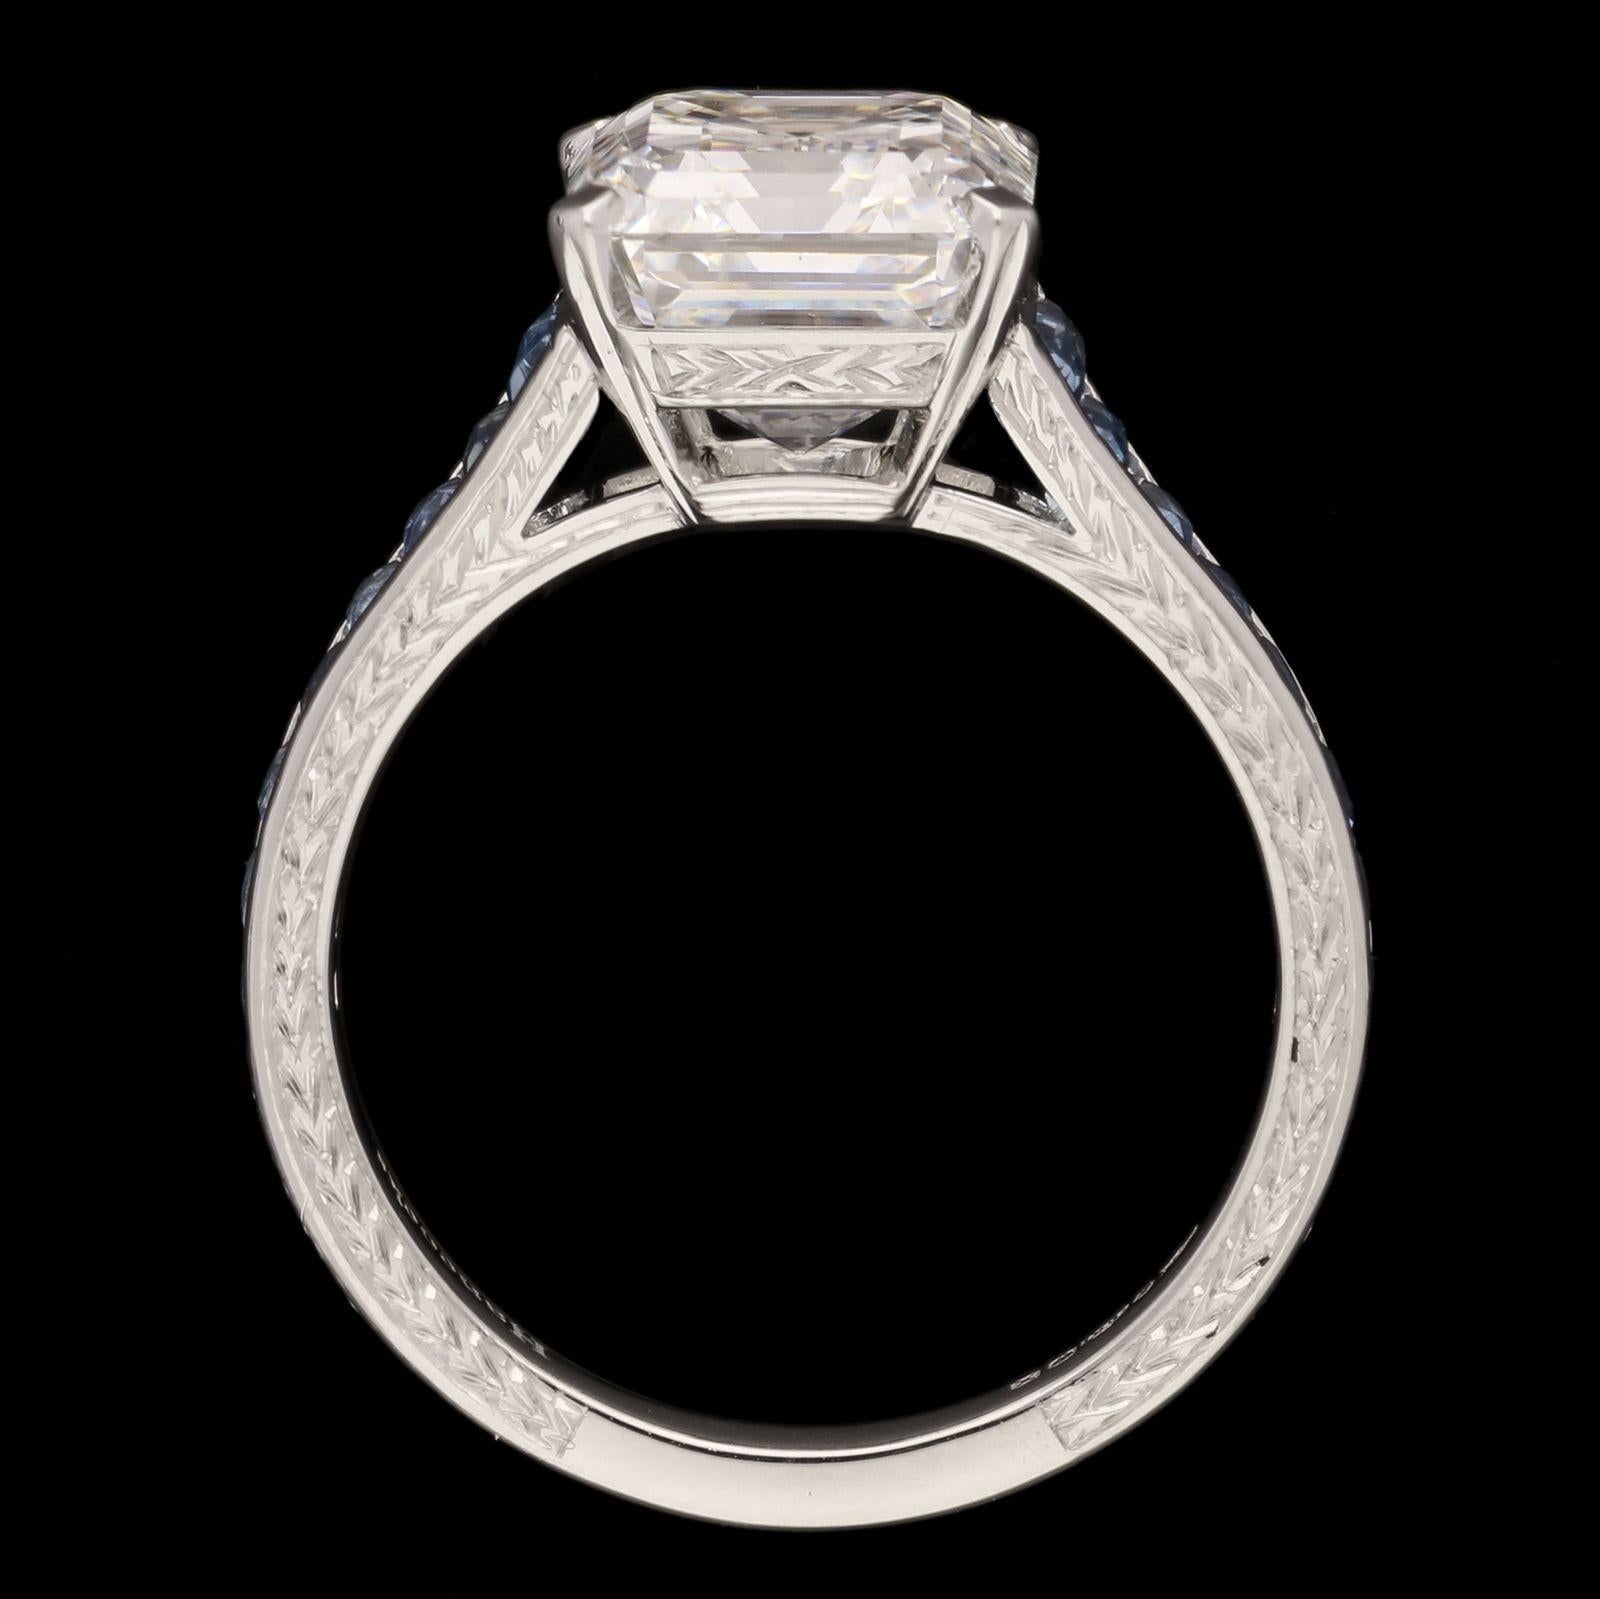 Hancocks 4.48ct Emerald Cut Diamond Ring with Aquamarine Shoulders in Platinum In New Condition For Sale In London, GB